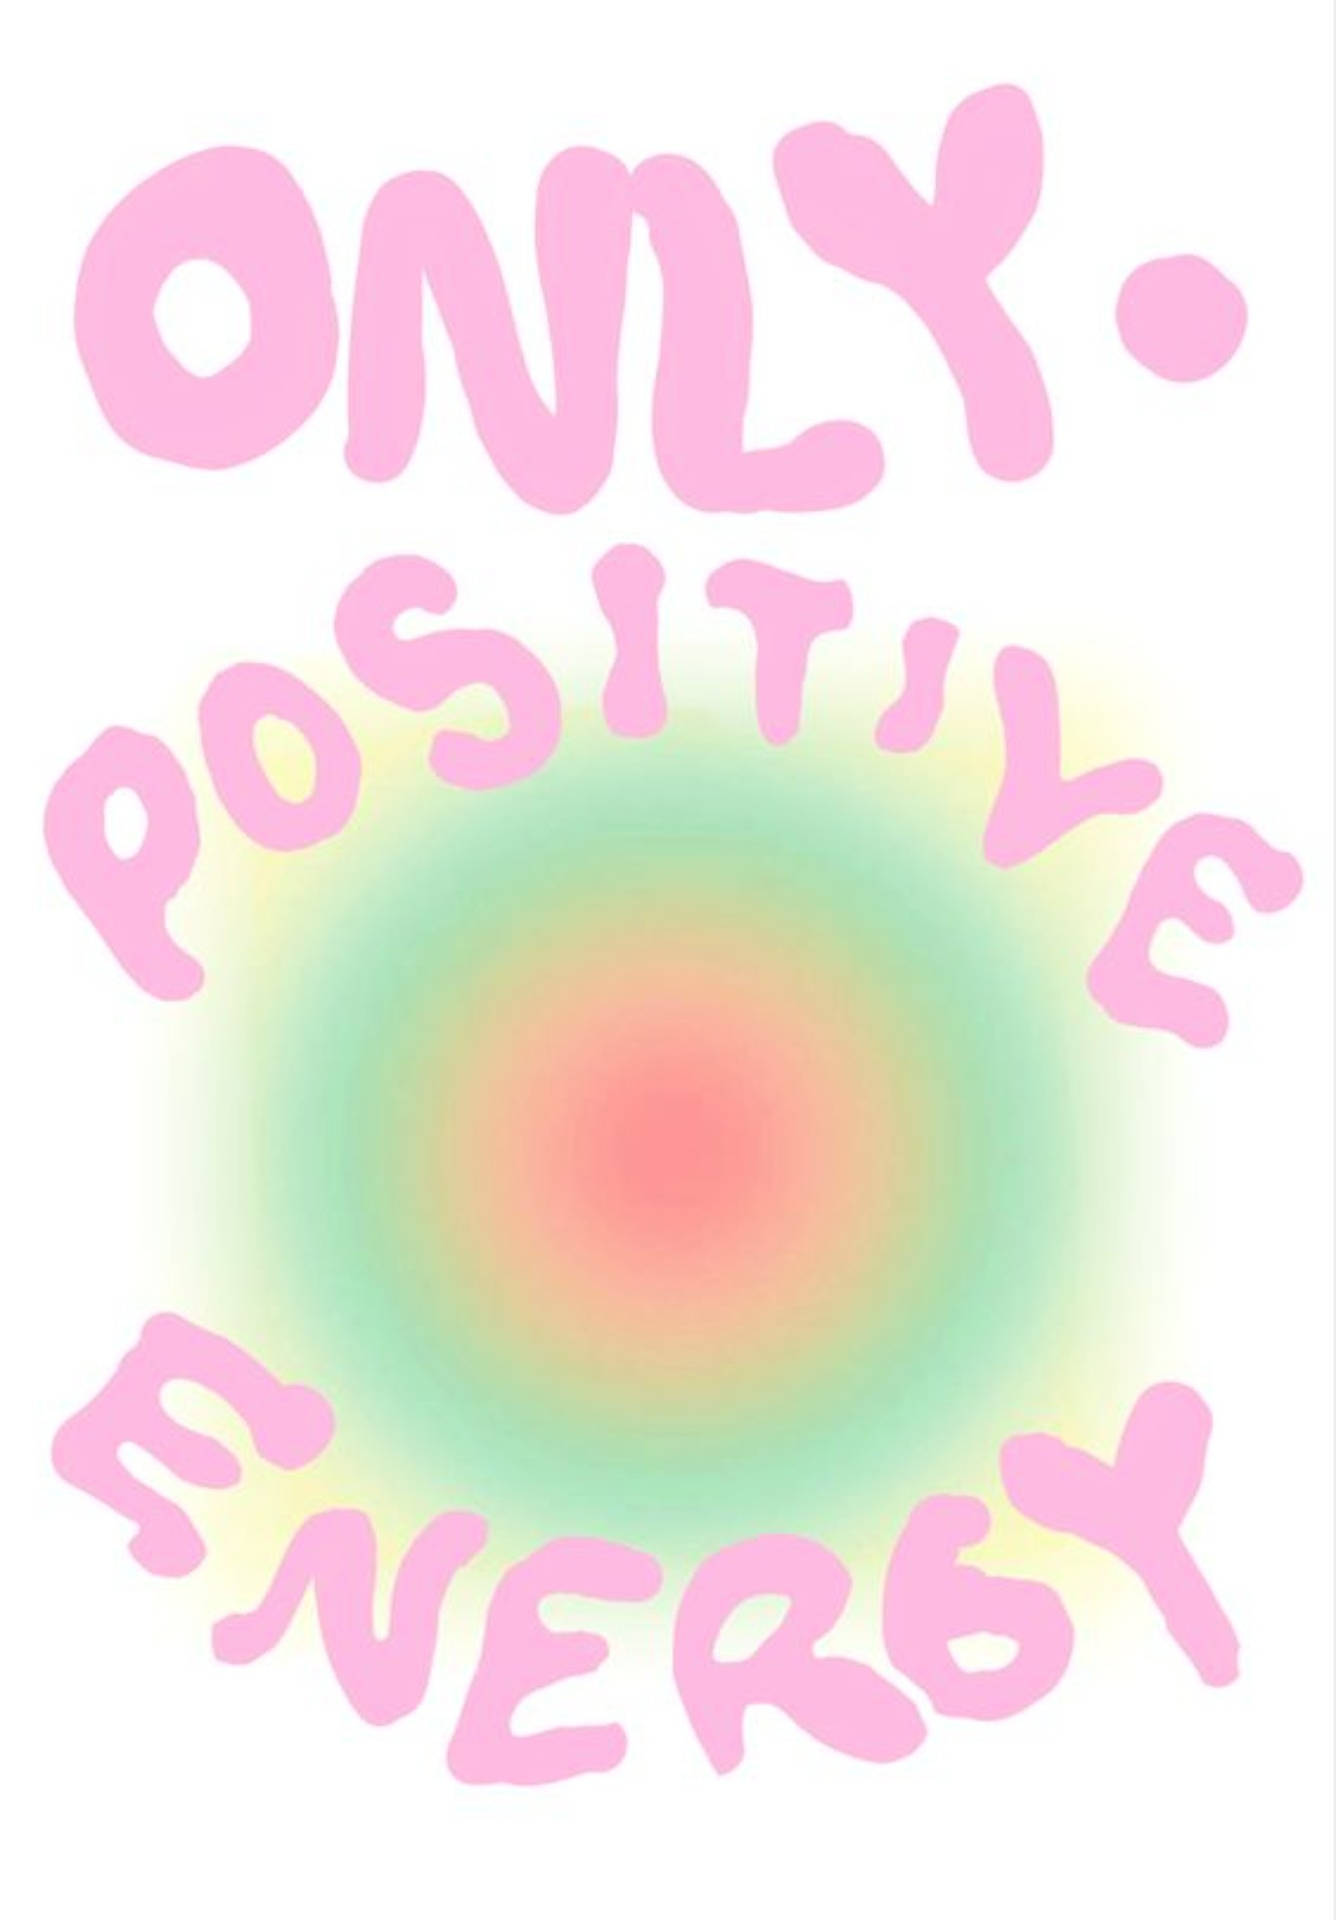 Only Positive Energy Quotes Background